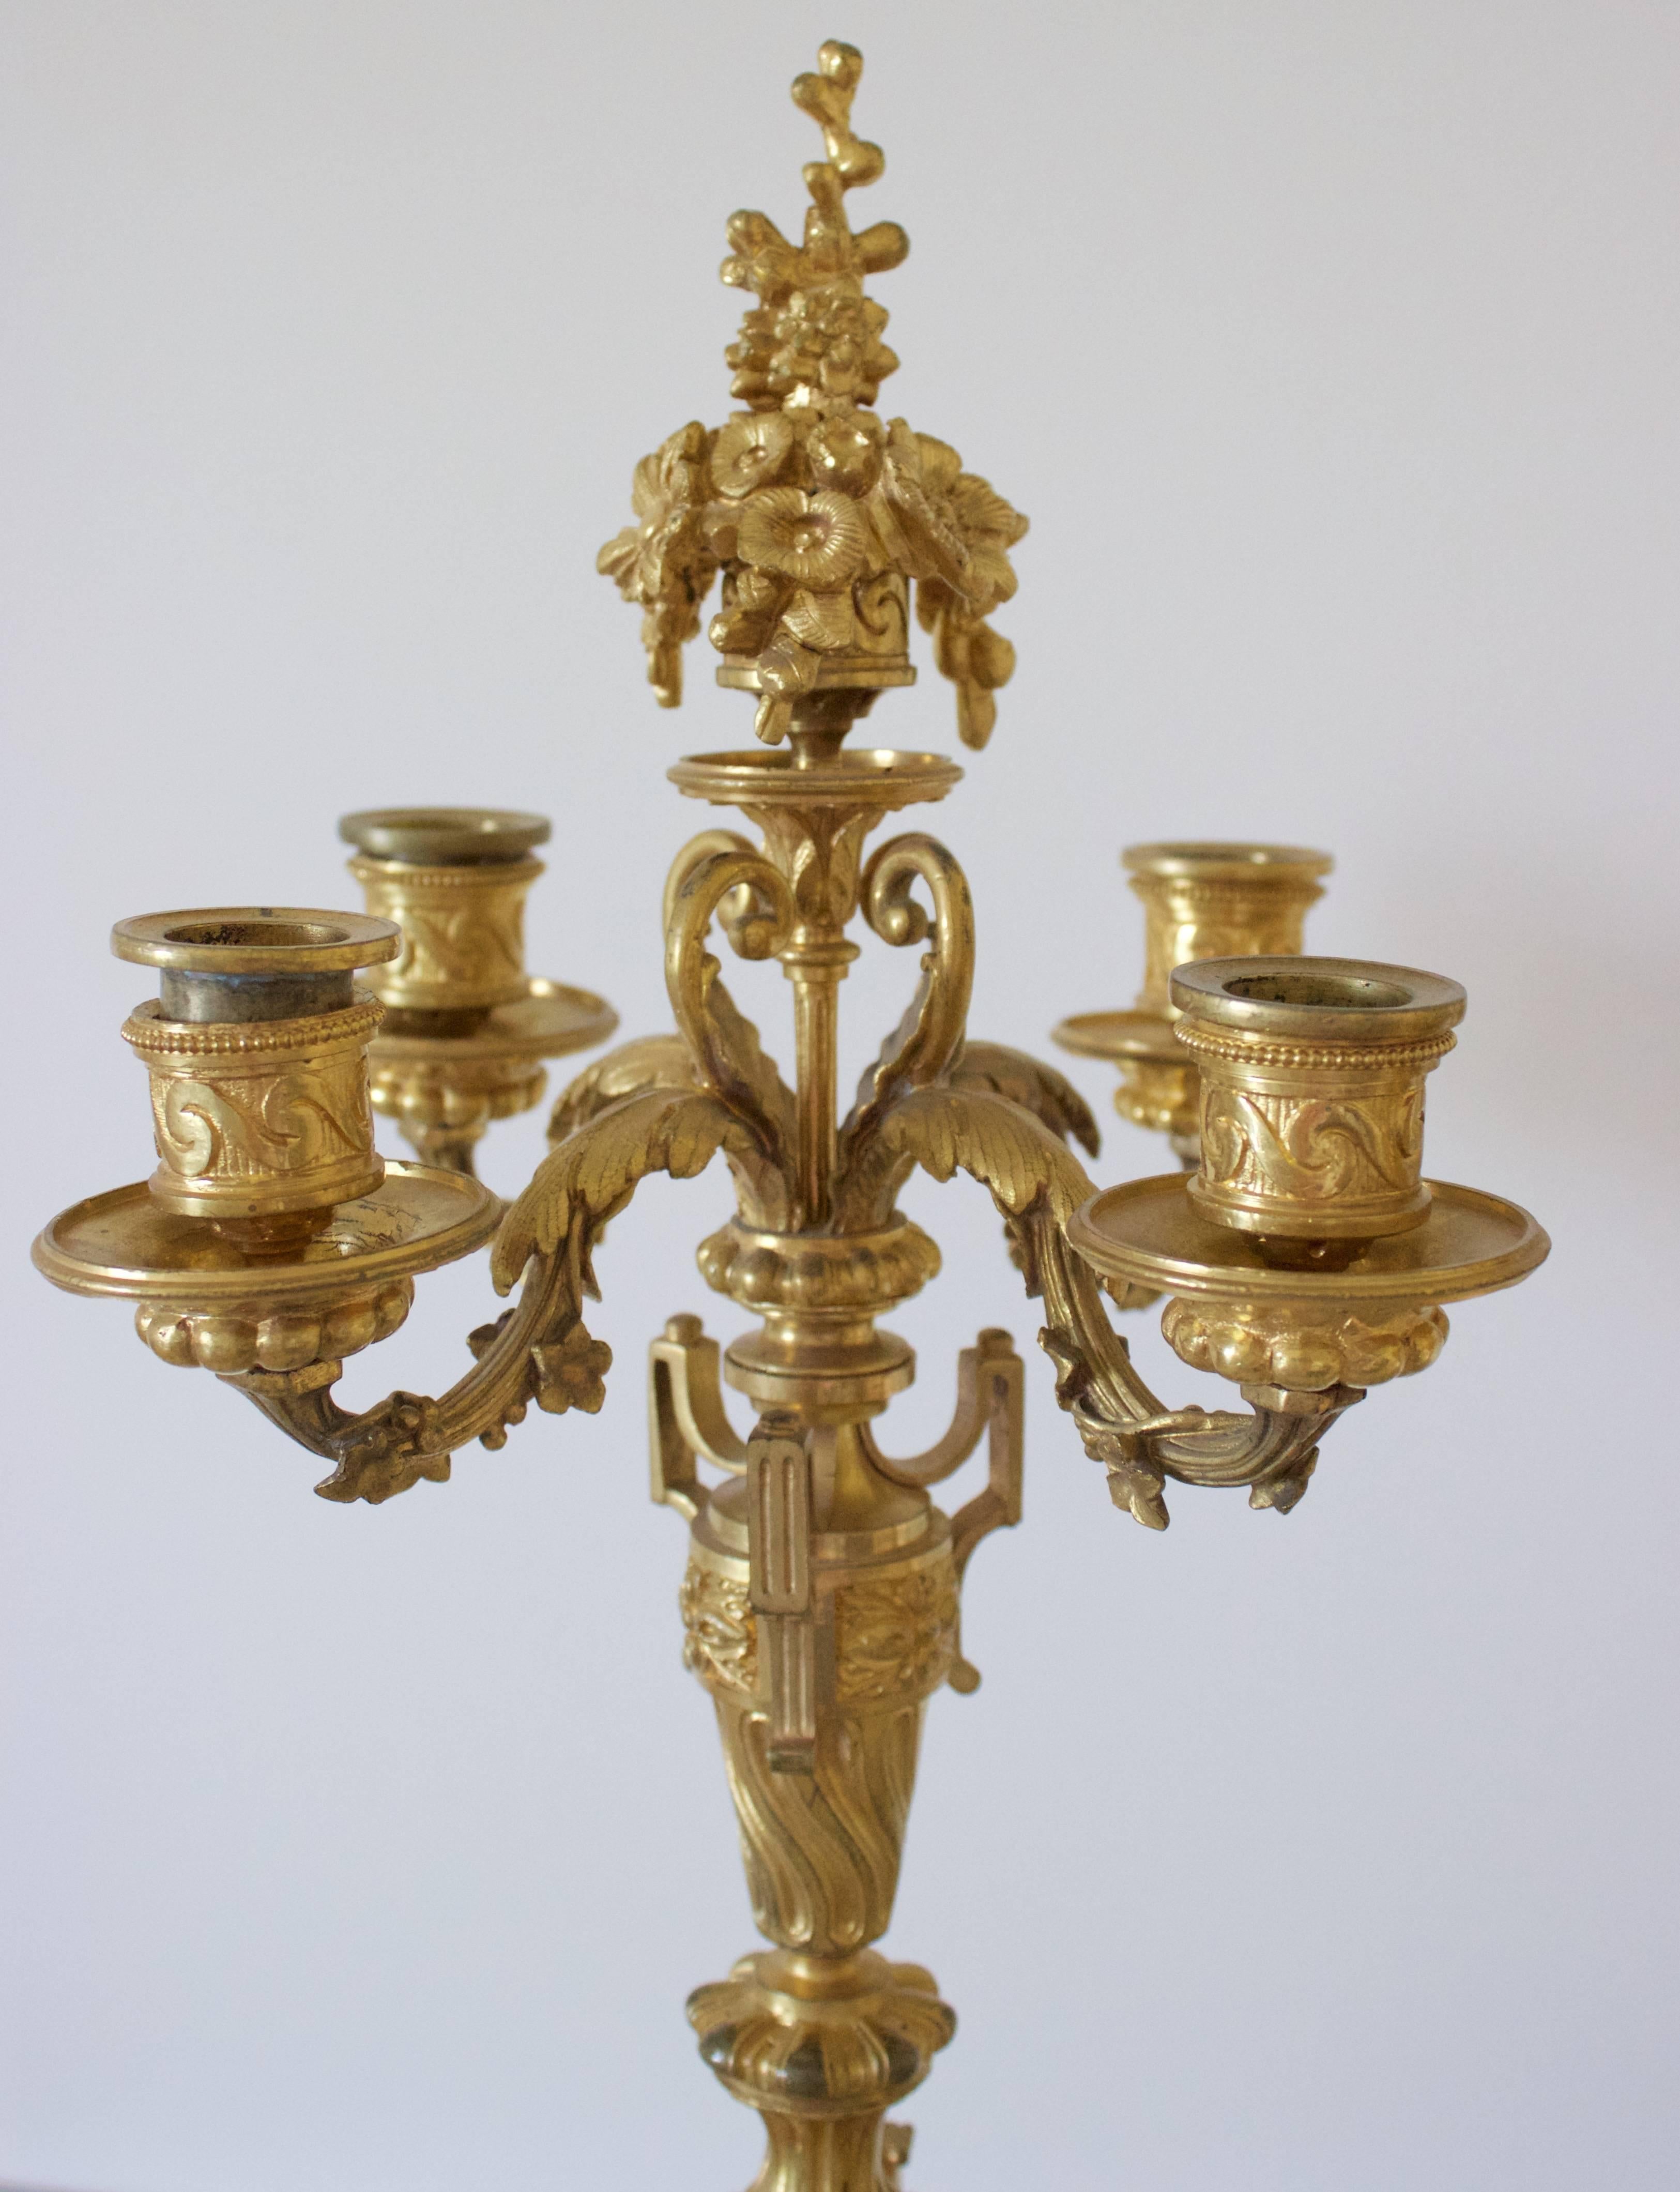 Pair of Napoleon III Period French Ormolu Bronze and Sevres Porcelain Candelabra In Good Condition For Sale In Charleston, SC